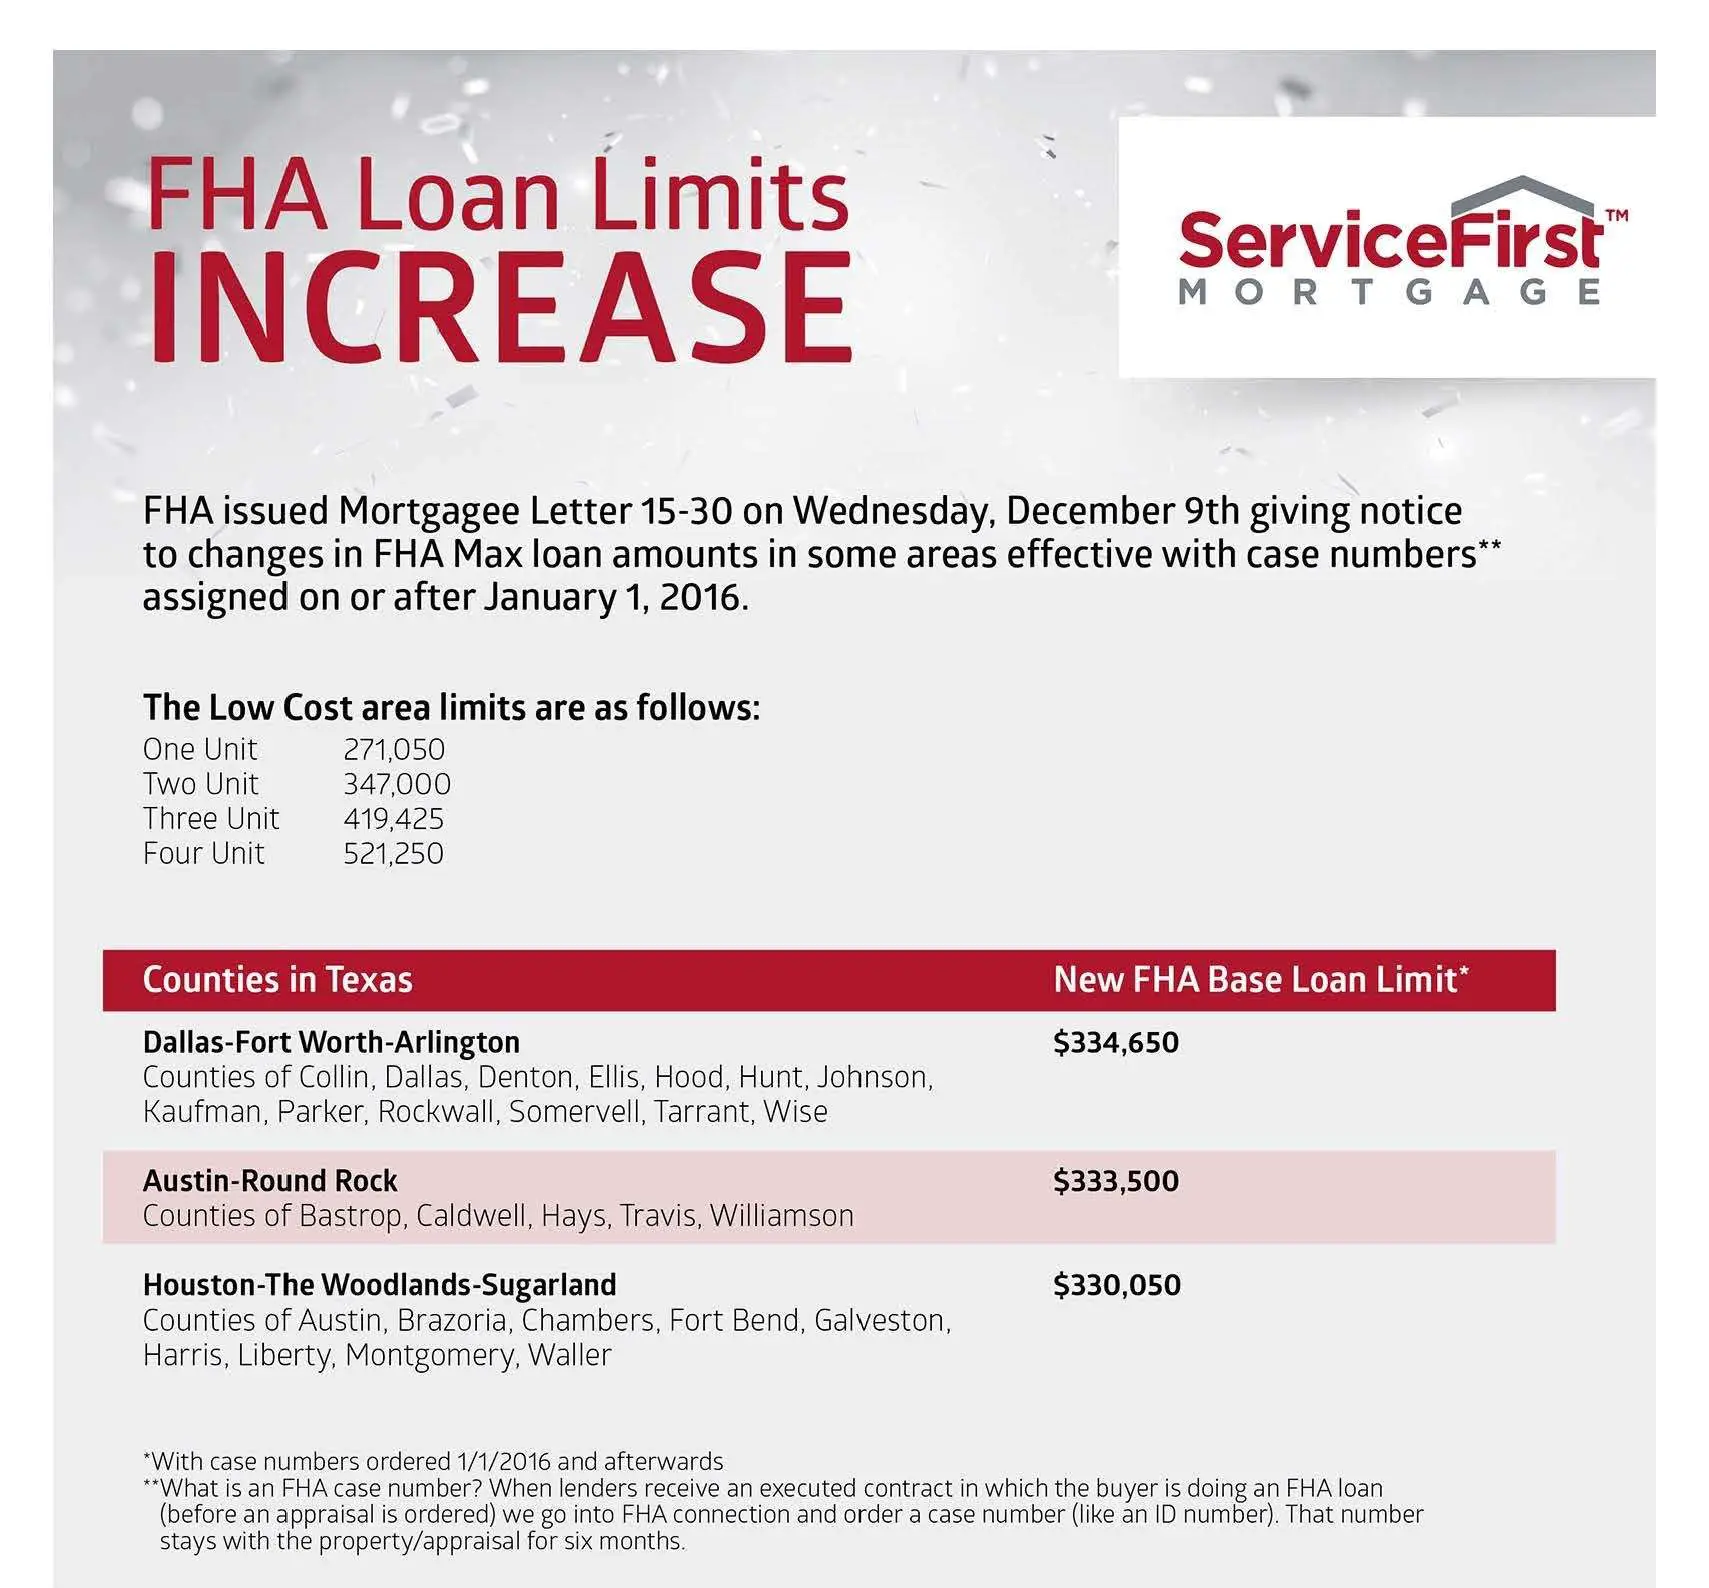 Best FHA Home Loan for Plano Texas Home Buyers